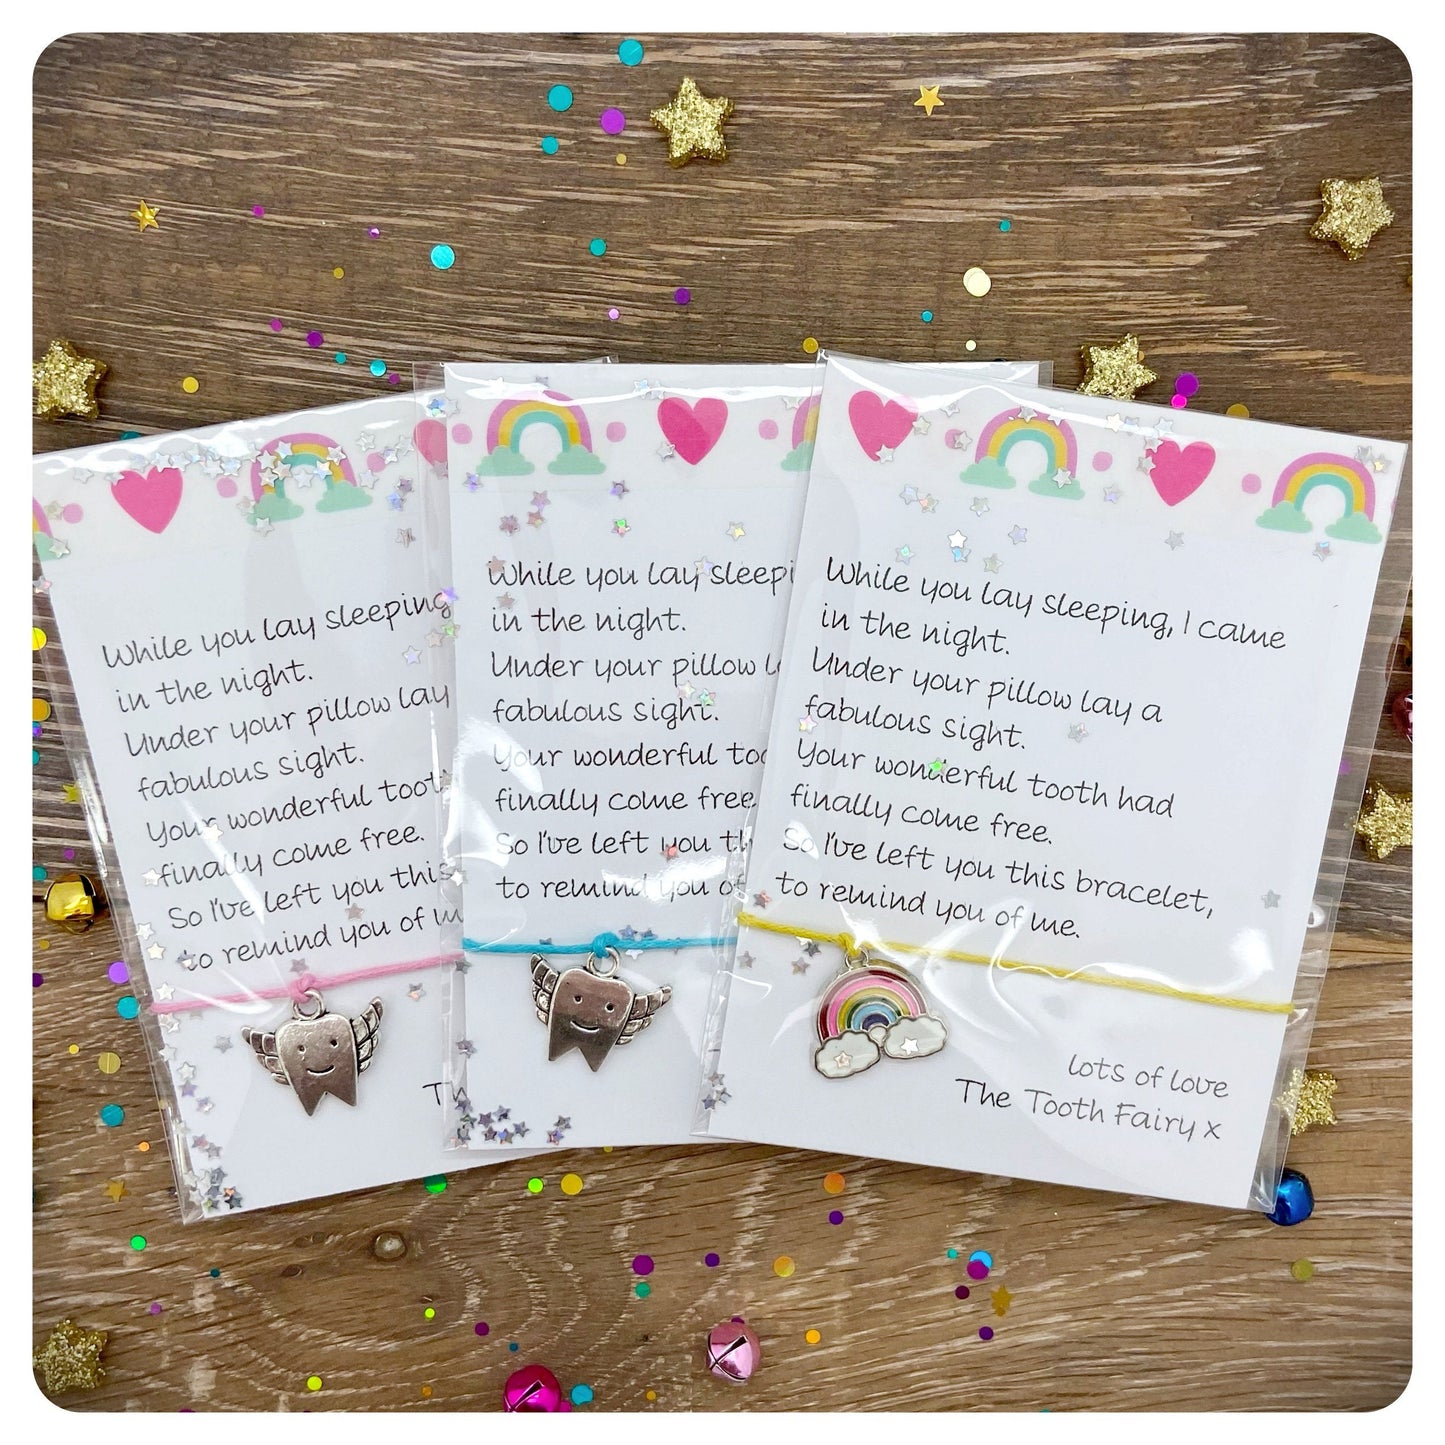 Tooth Fairy Message Card, Tooth Fairy Wish Bracelet, Tooth Fairy Keepsake, Girls Lost Tooth Gift, Boys Tooth Fairy, Tooth Fairy Note